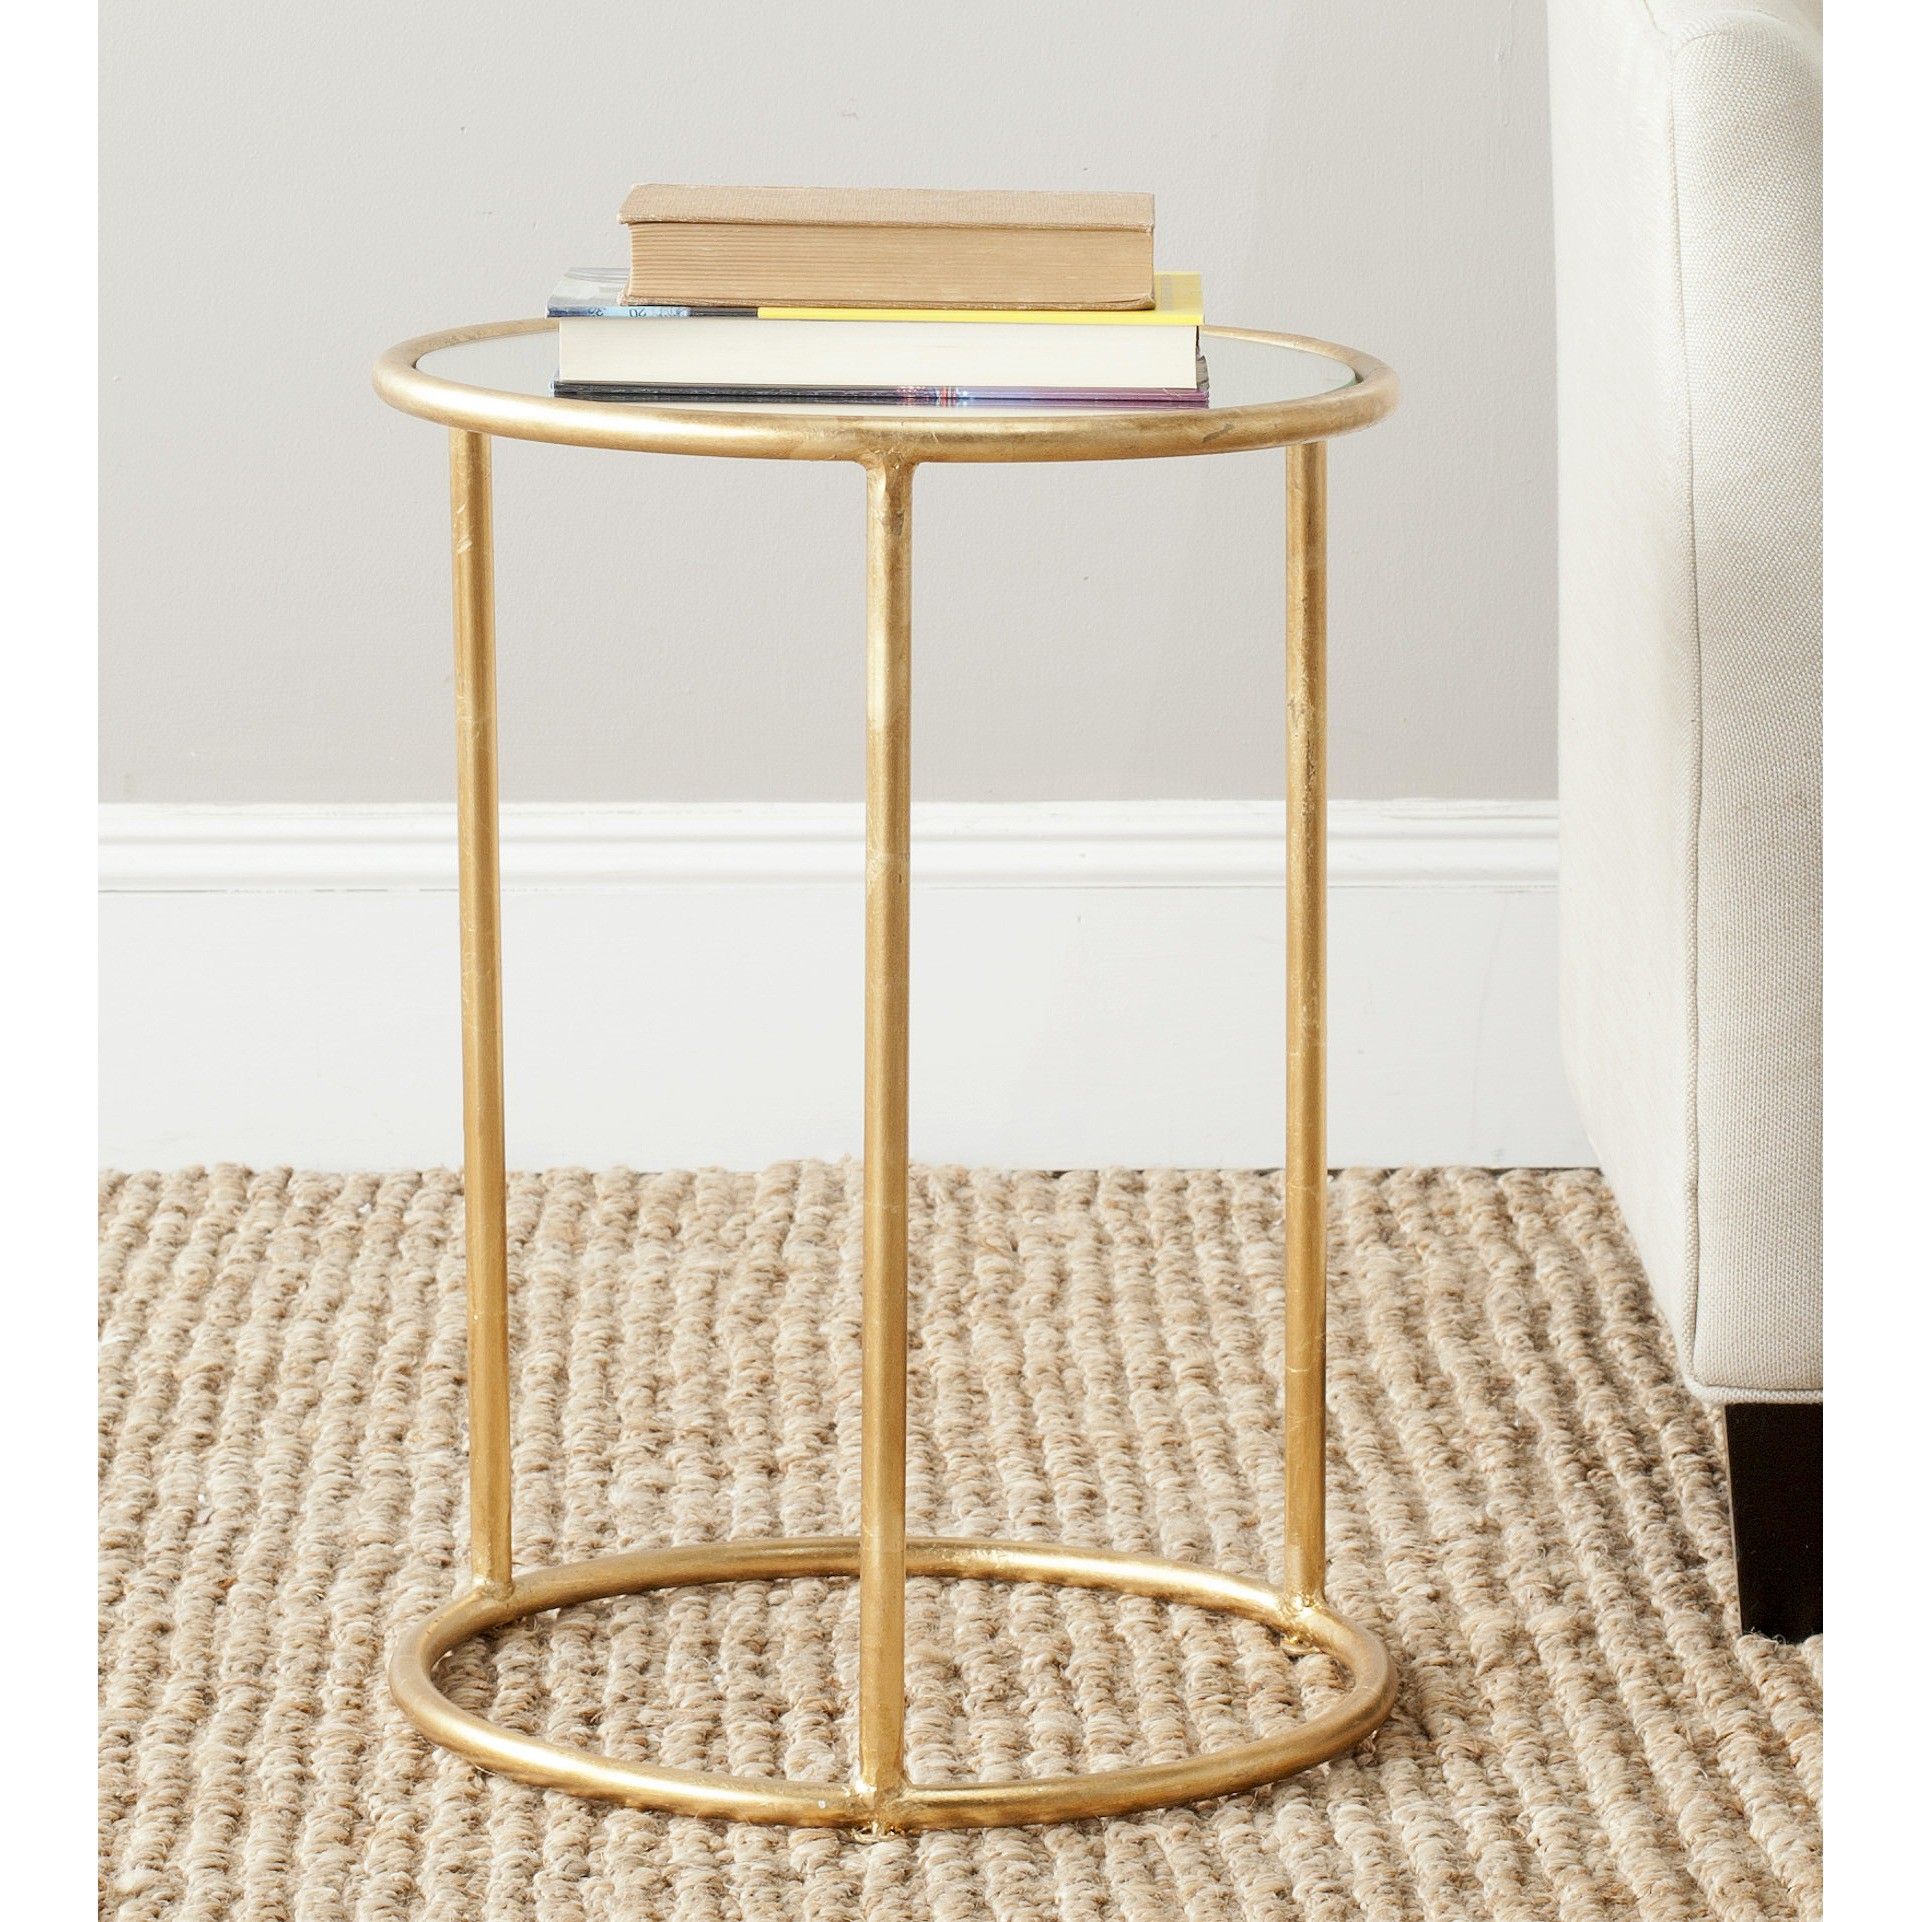 safavieh shay accent table target when apartment wants white glass lamp mosaic ethan allen country french coffee resin outdoor side room essentials furniture kitchen dining pond